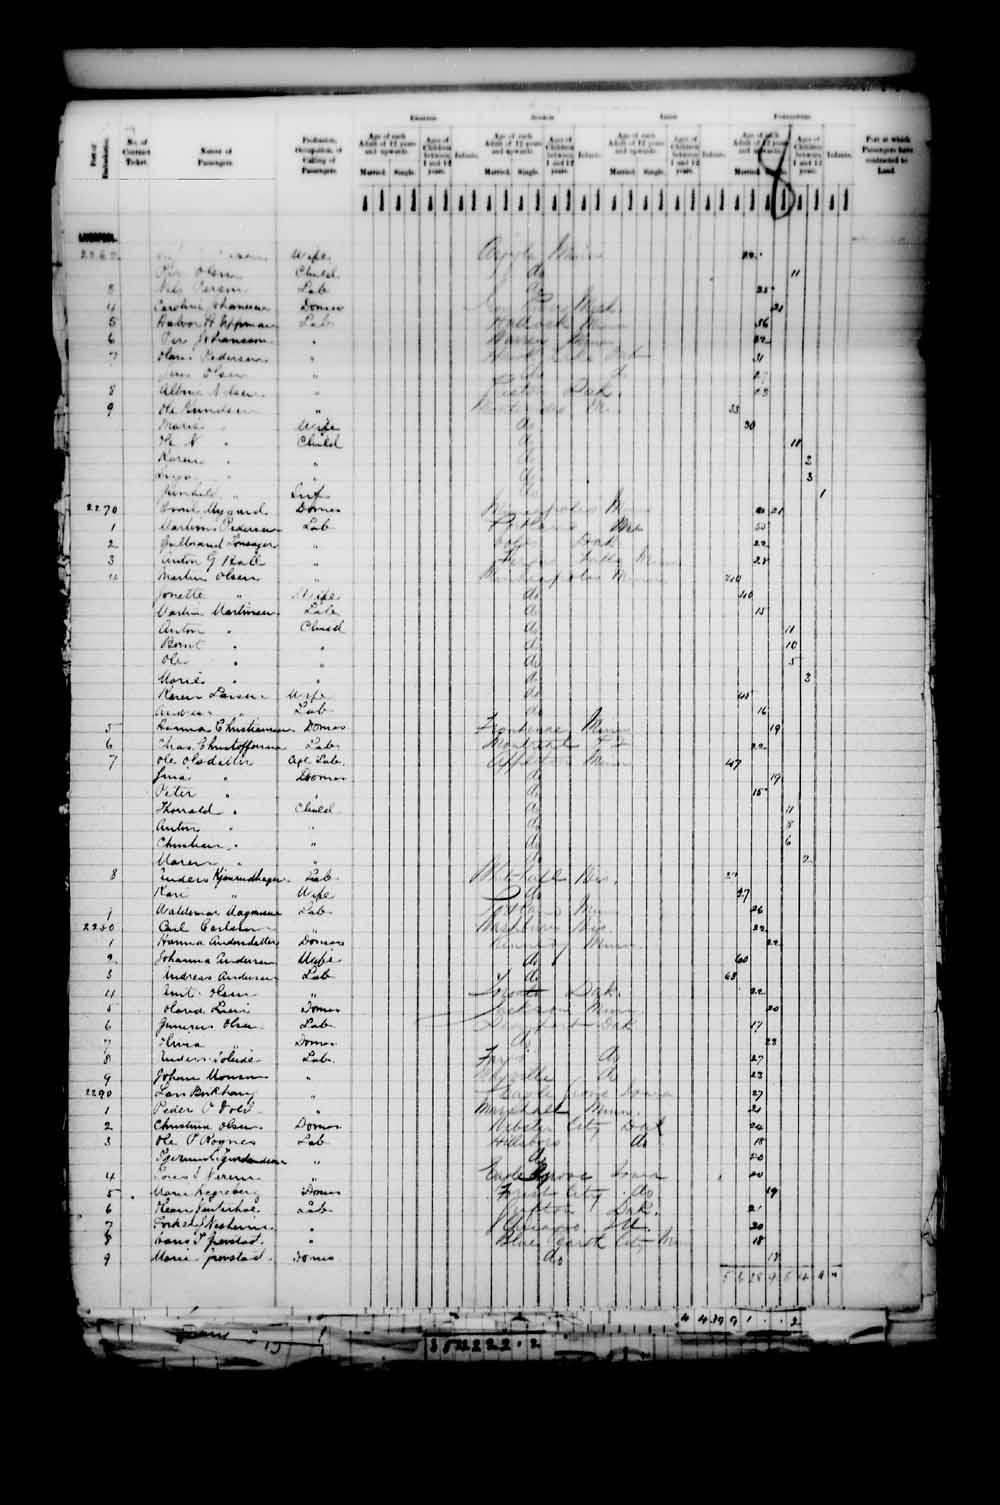 Digitized page of Passenger Lists for Image No.: e003546739